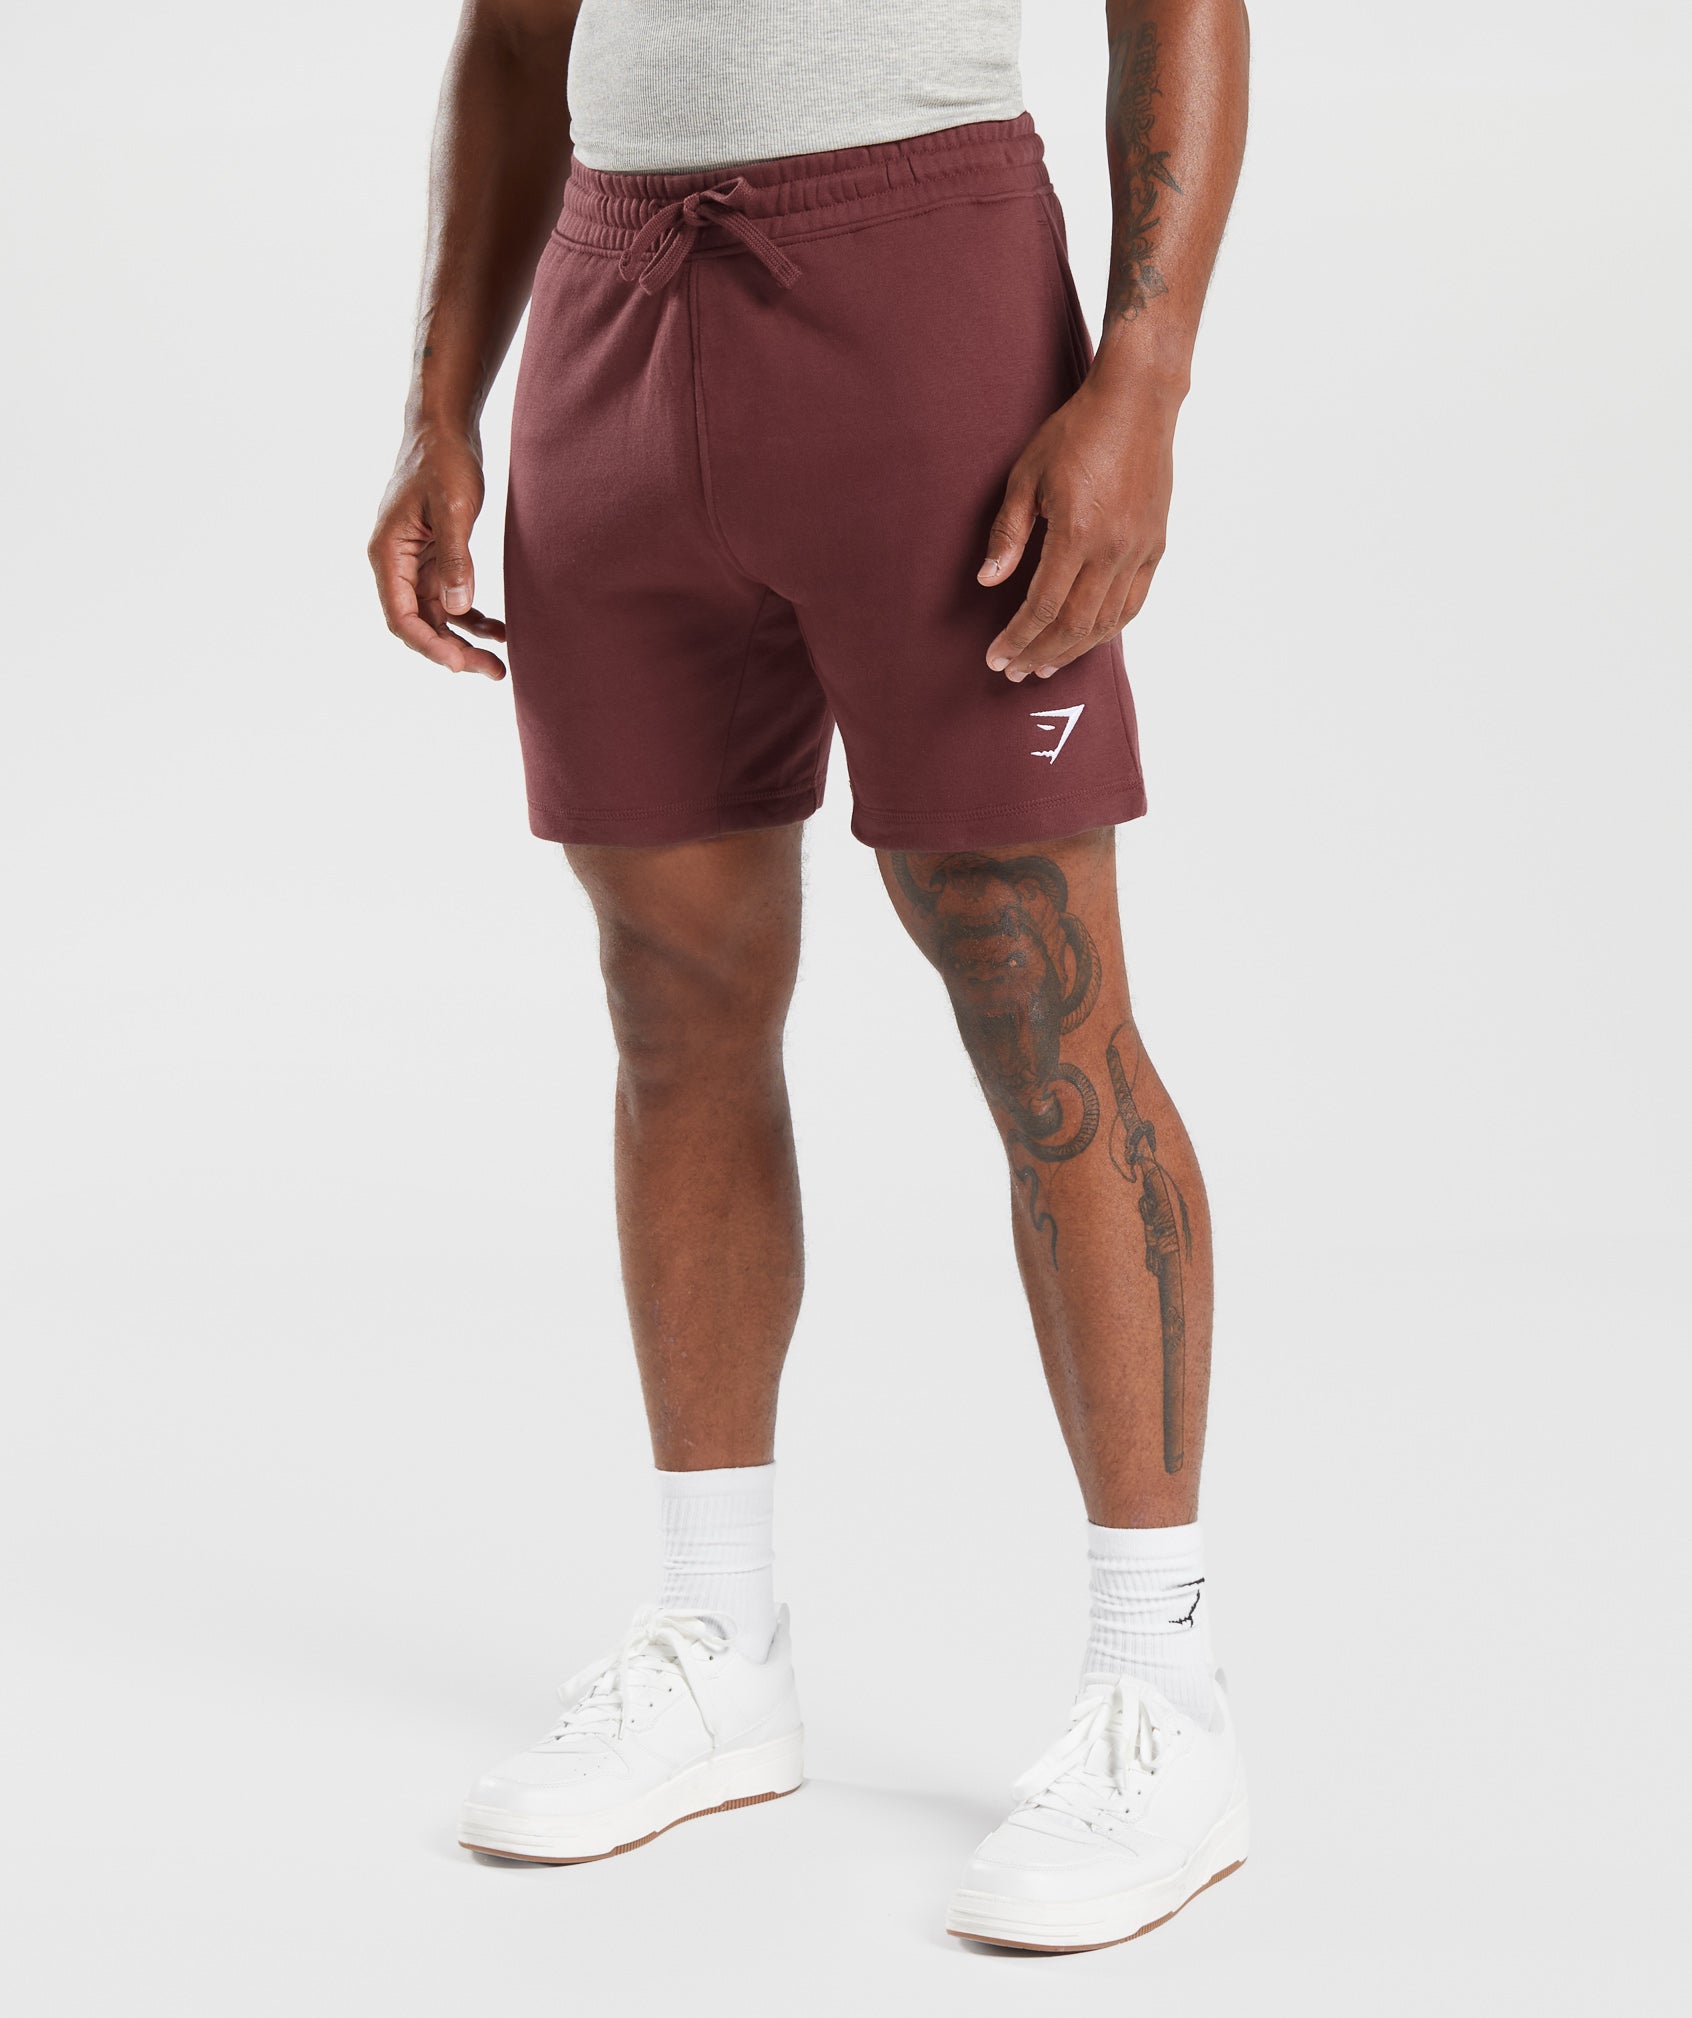 Crest 7" Shorts in Washed Burgundy - view 3